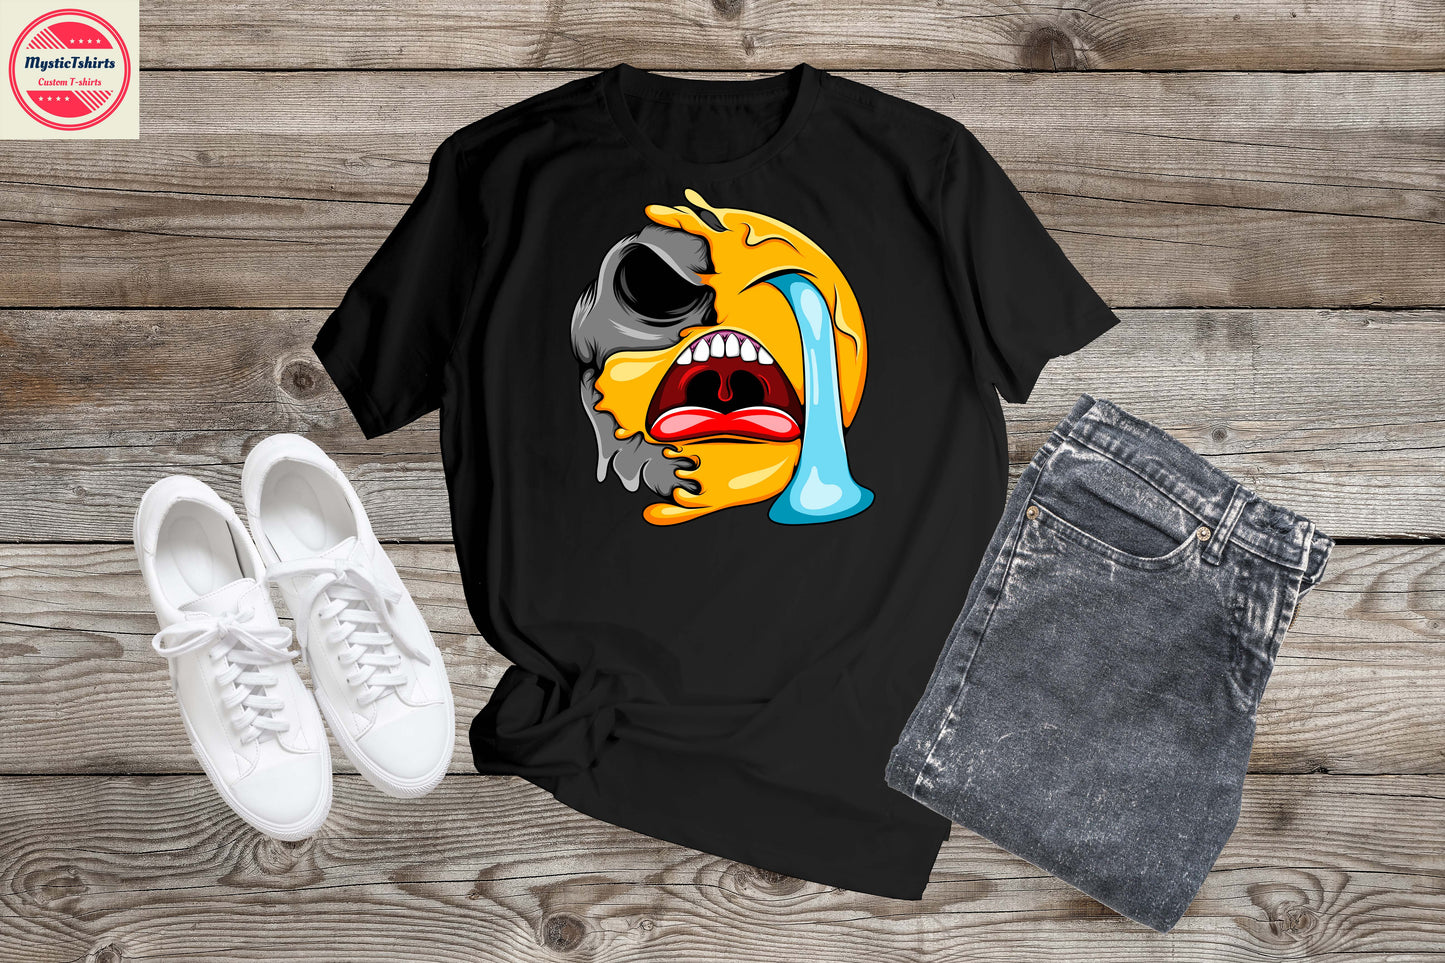 096. CRAZY FACE, Personalized T-Shirt, Custom Text, Make Your Own Shirt, Custom Tee